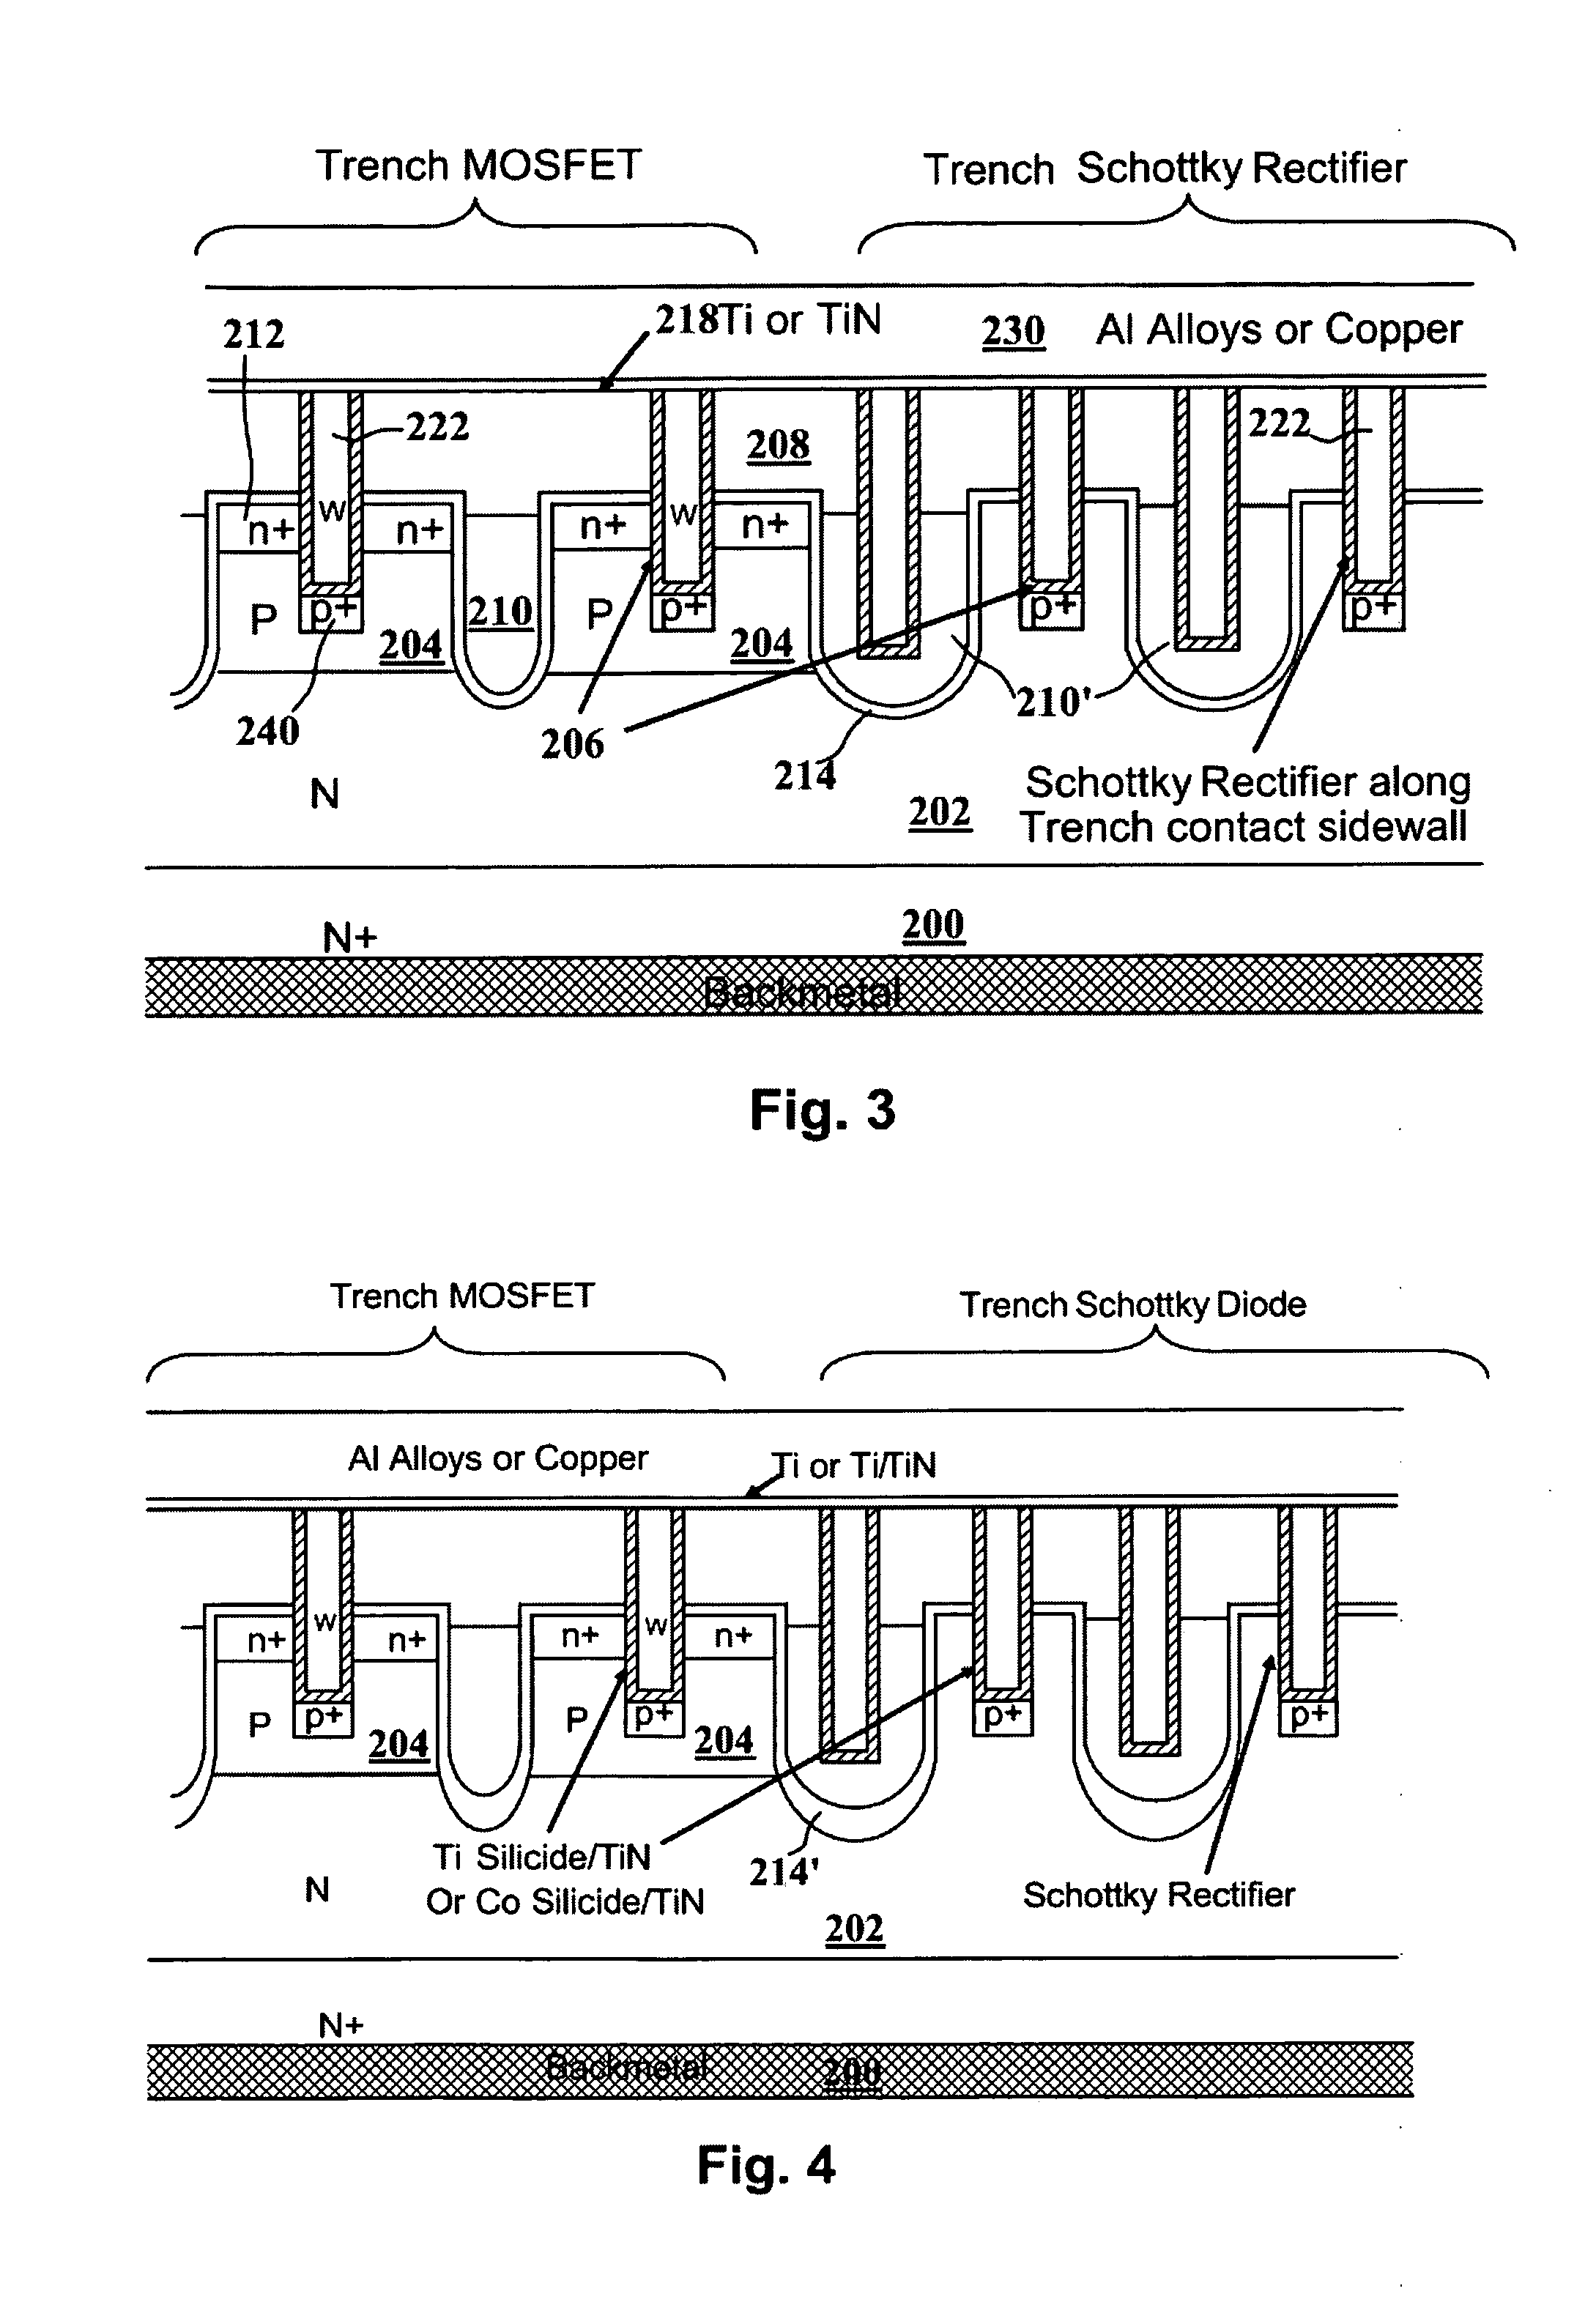 Integrated trench Mosfet and Schottky Rectifier with trench contact structure